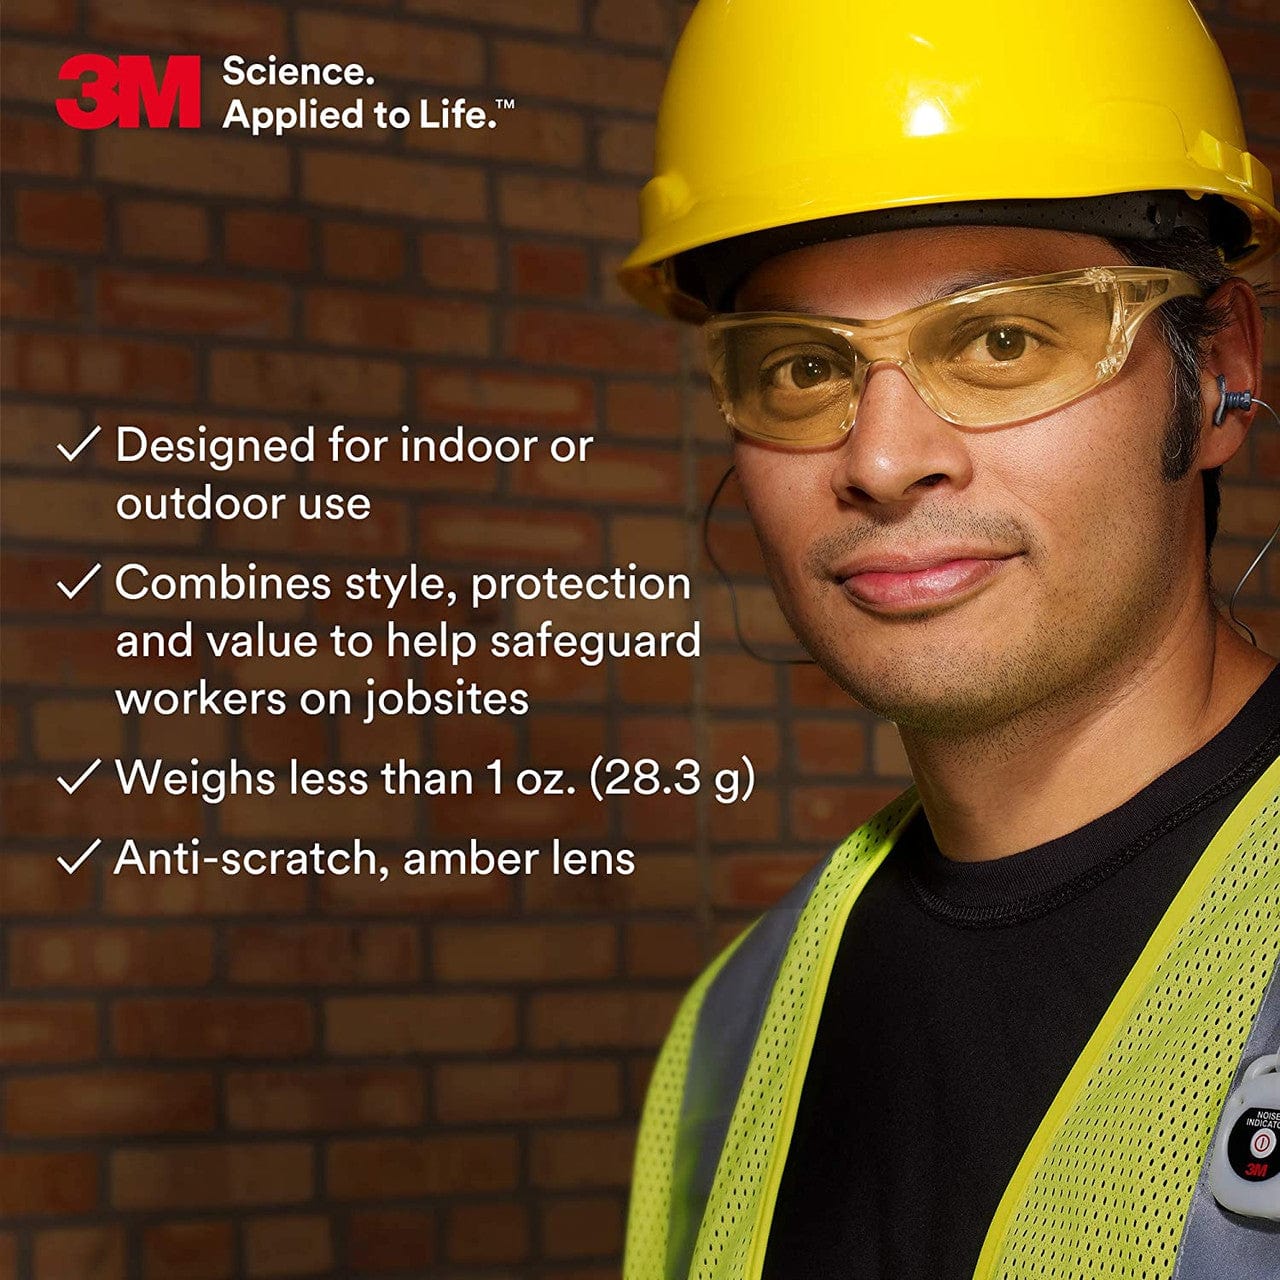 3M Virtua AP Safety Glasses with Amber Lens